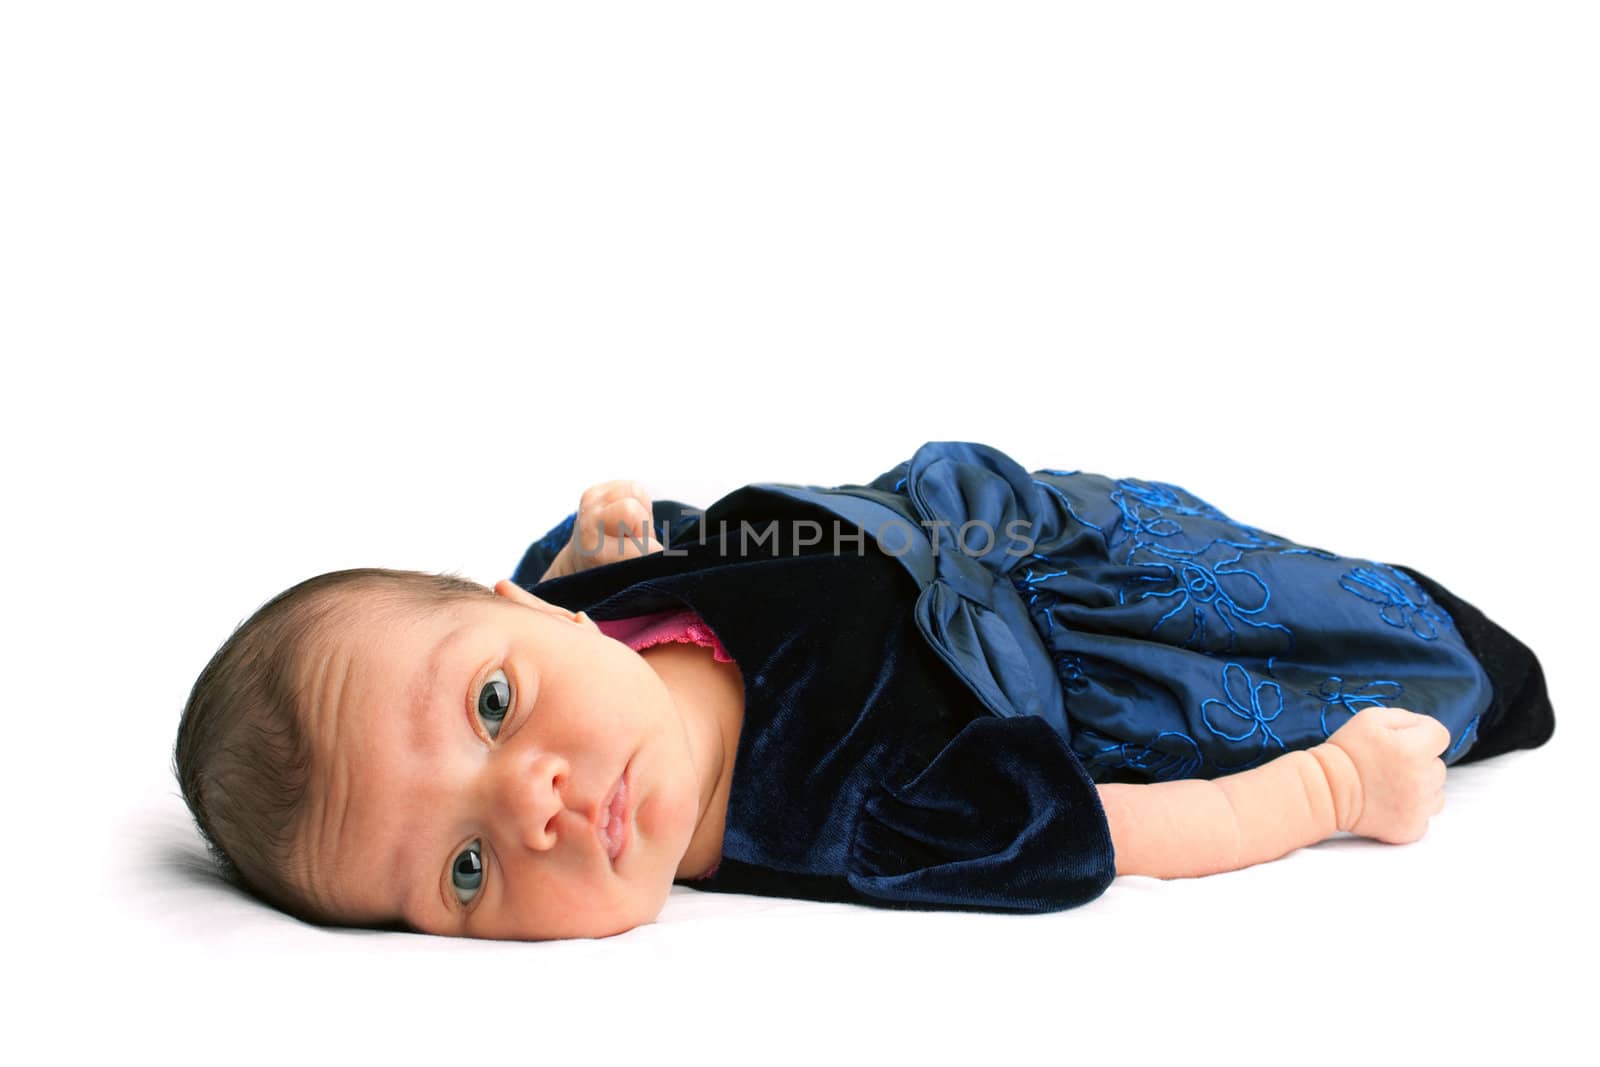 A cute newborn baby infant isolated on a white backdrop.